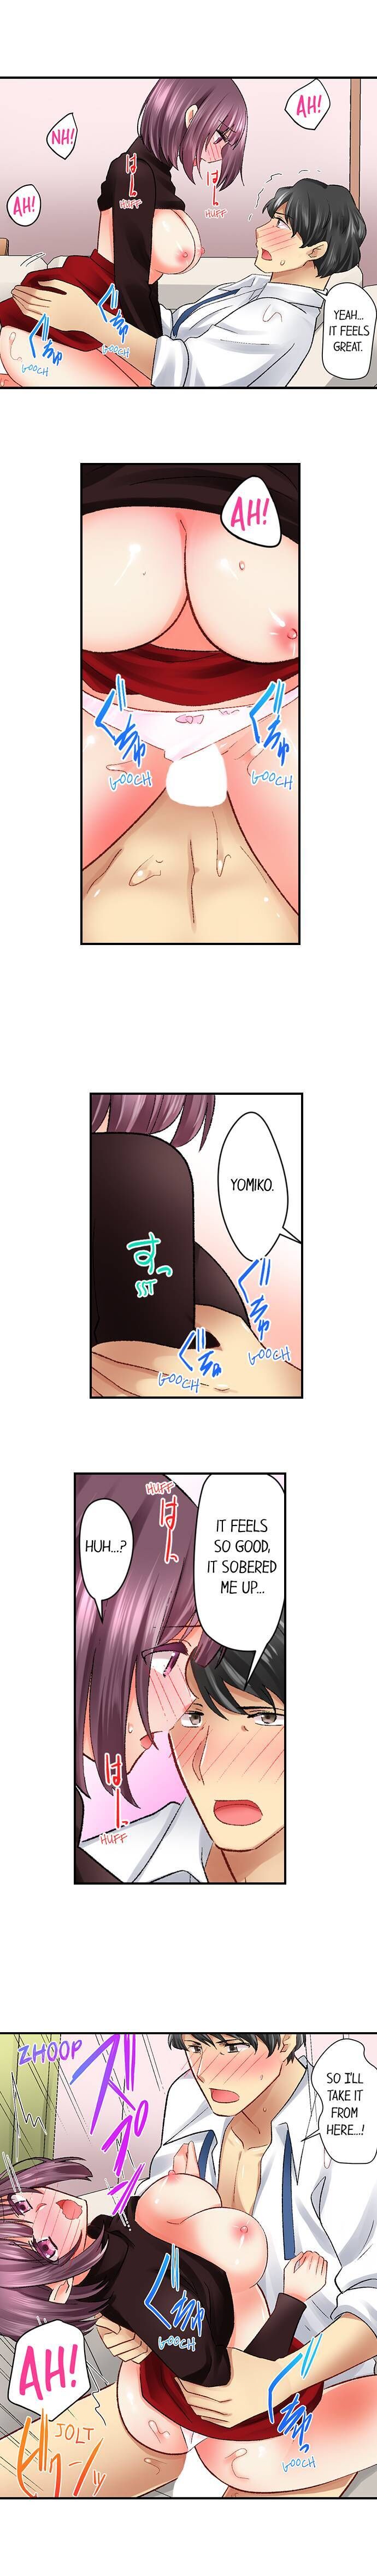 Our Kinky Newlywed Life - Chapter 36 Page 6